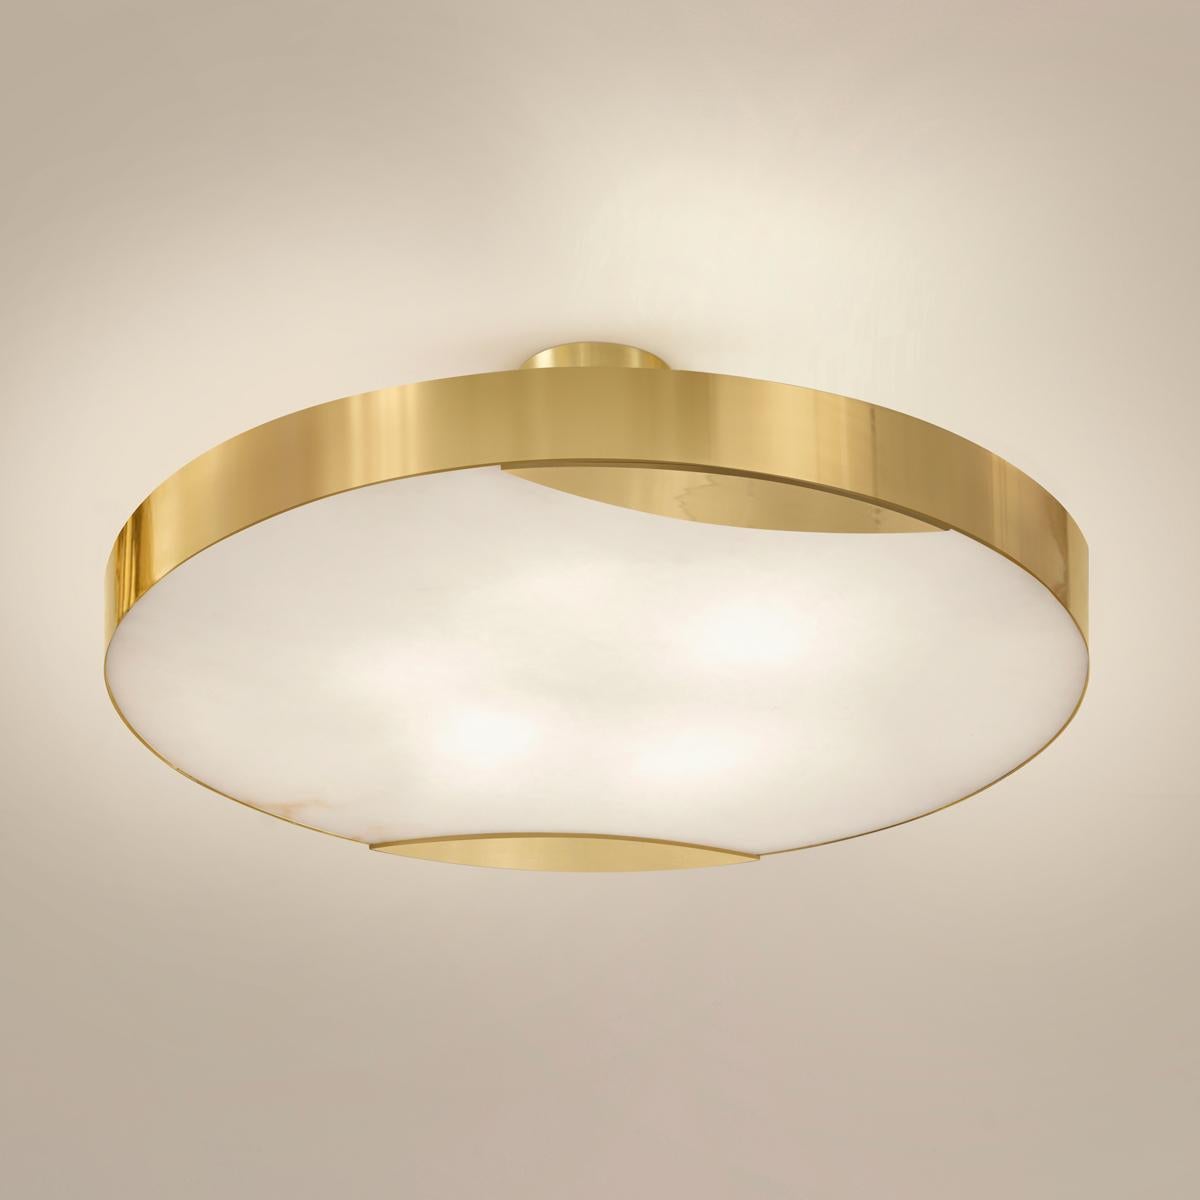 Contemporary Cloud N.1 Ceiling Light by Gaspare Asaro-Satin Brass Finish For Sale